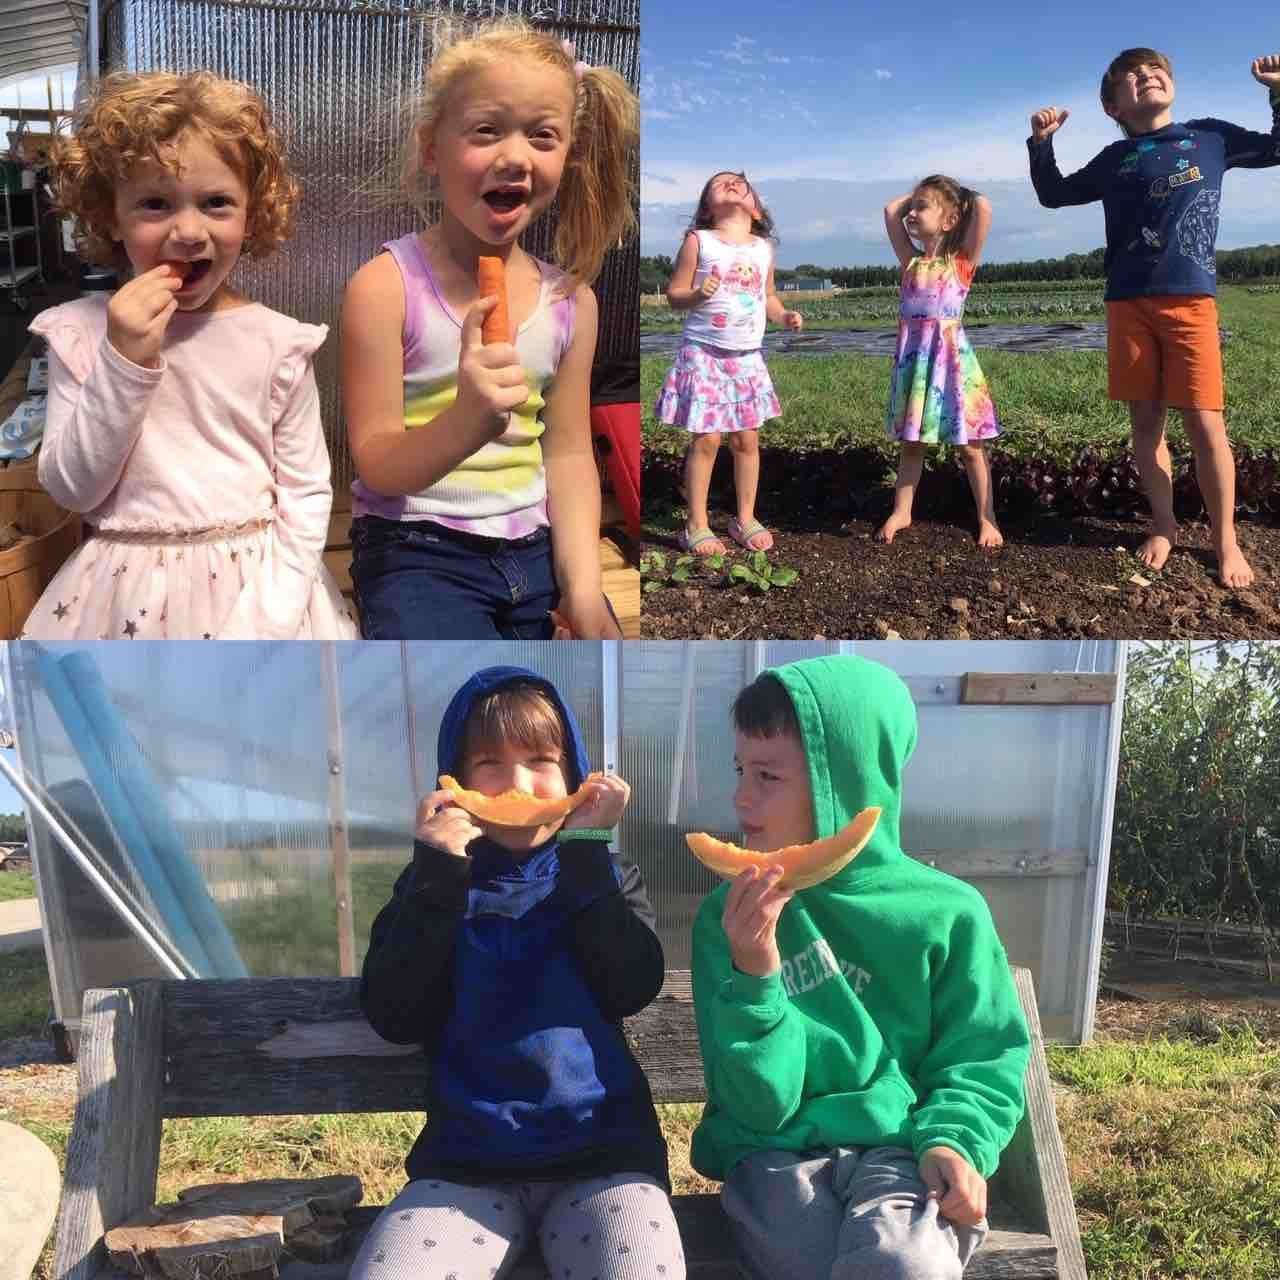 Previous Happening: Kiddos on the Farm